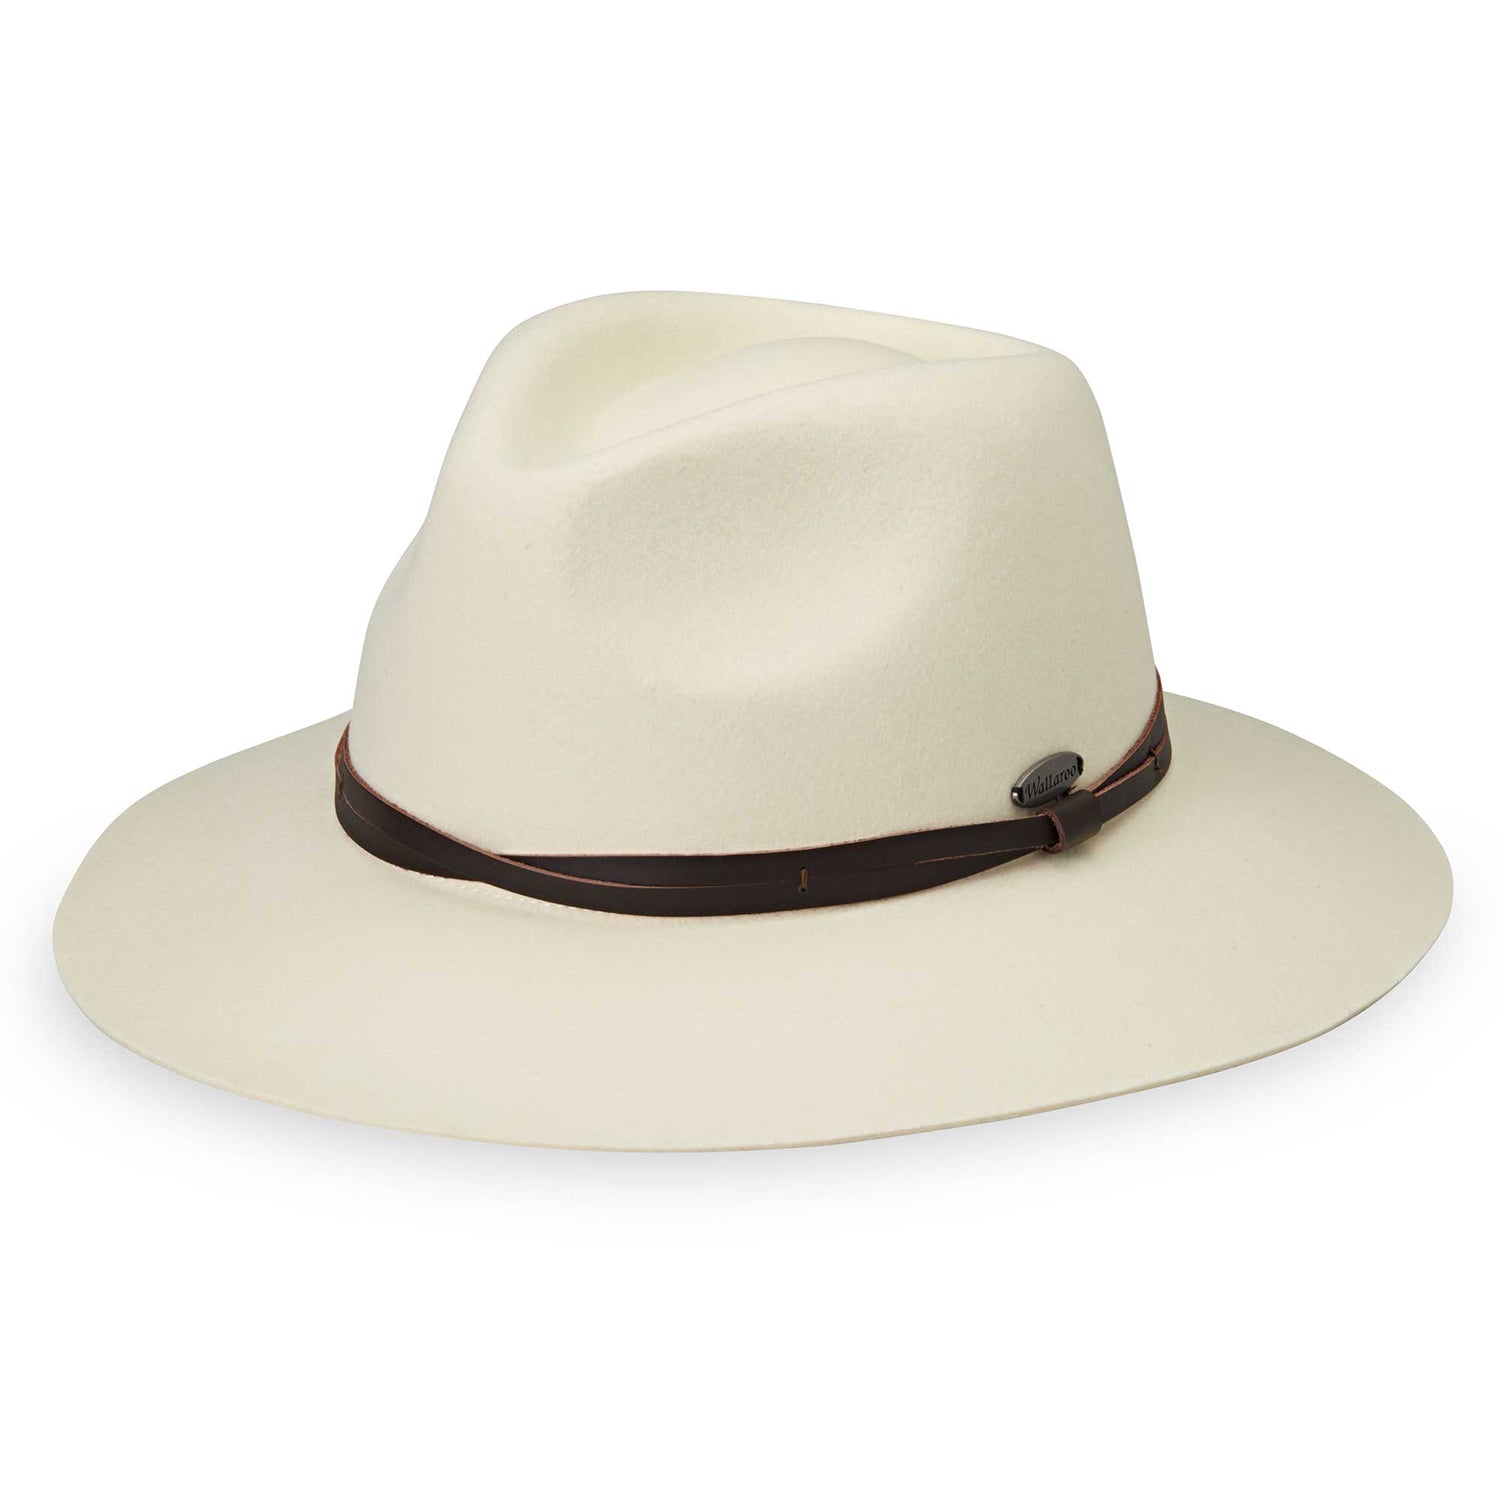 Featuring Wallaroo Aspen fall and winter felt sun hat with a UPF 50 rating